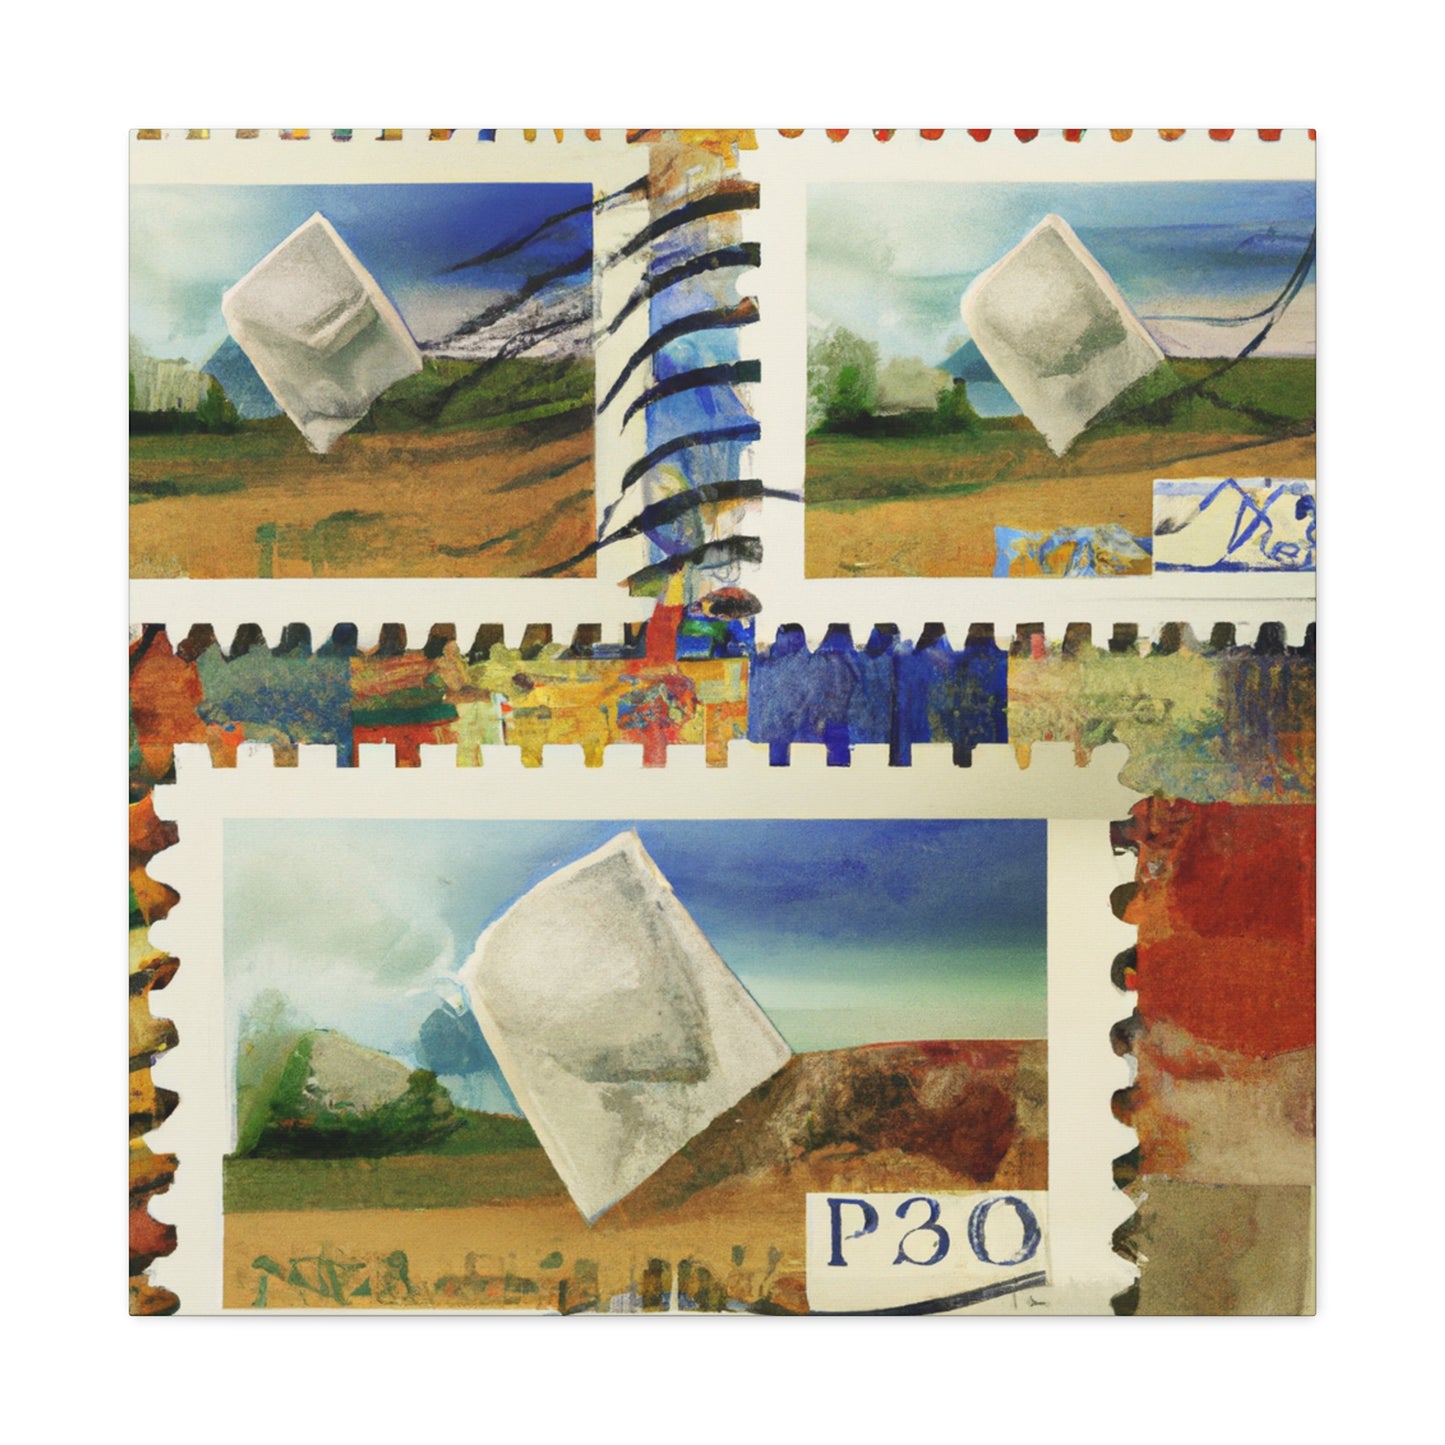 "Global Wonders" - Postage Stamp Collector Canvas Wall Art